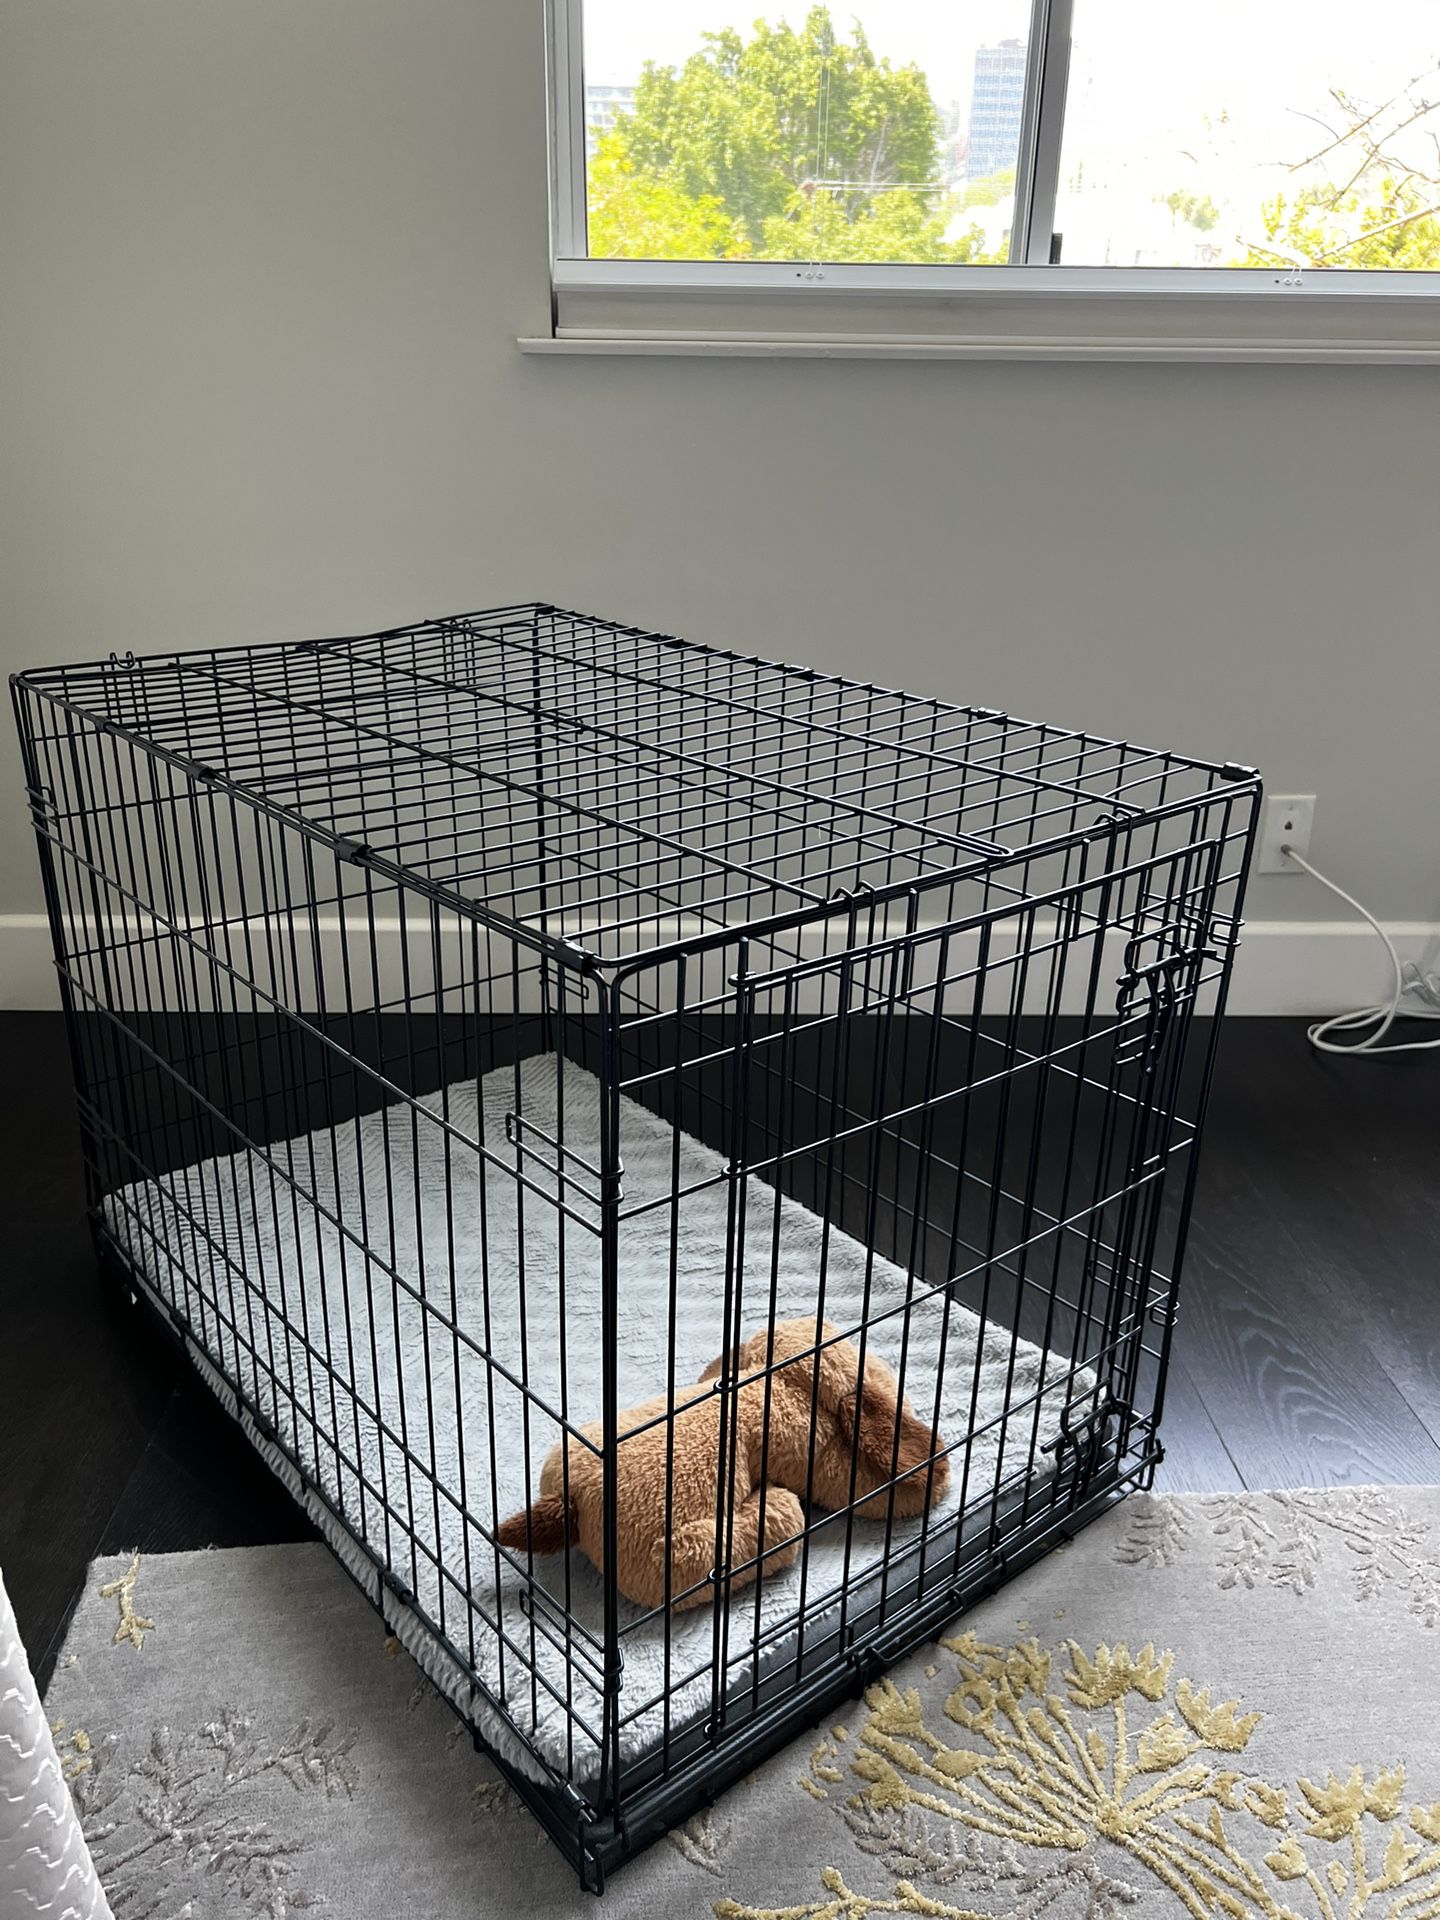 Single Door Collapsible Dog Crate